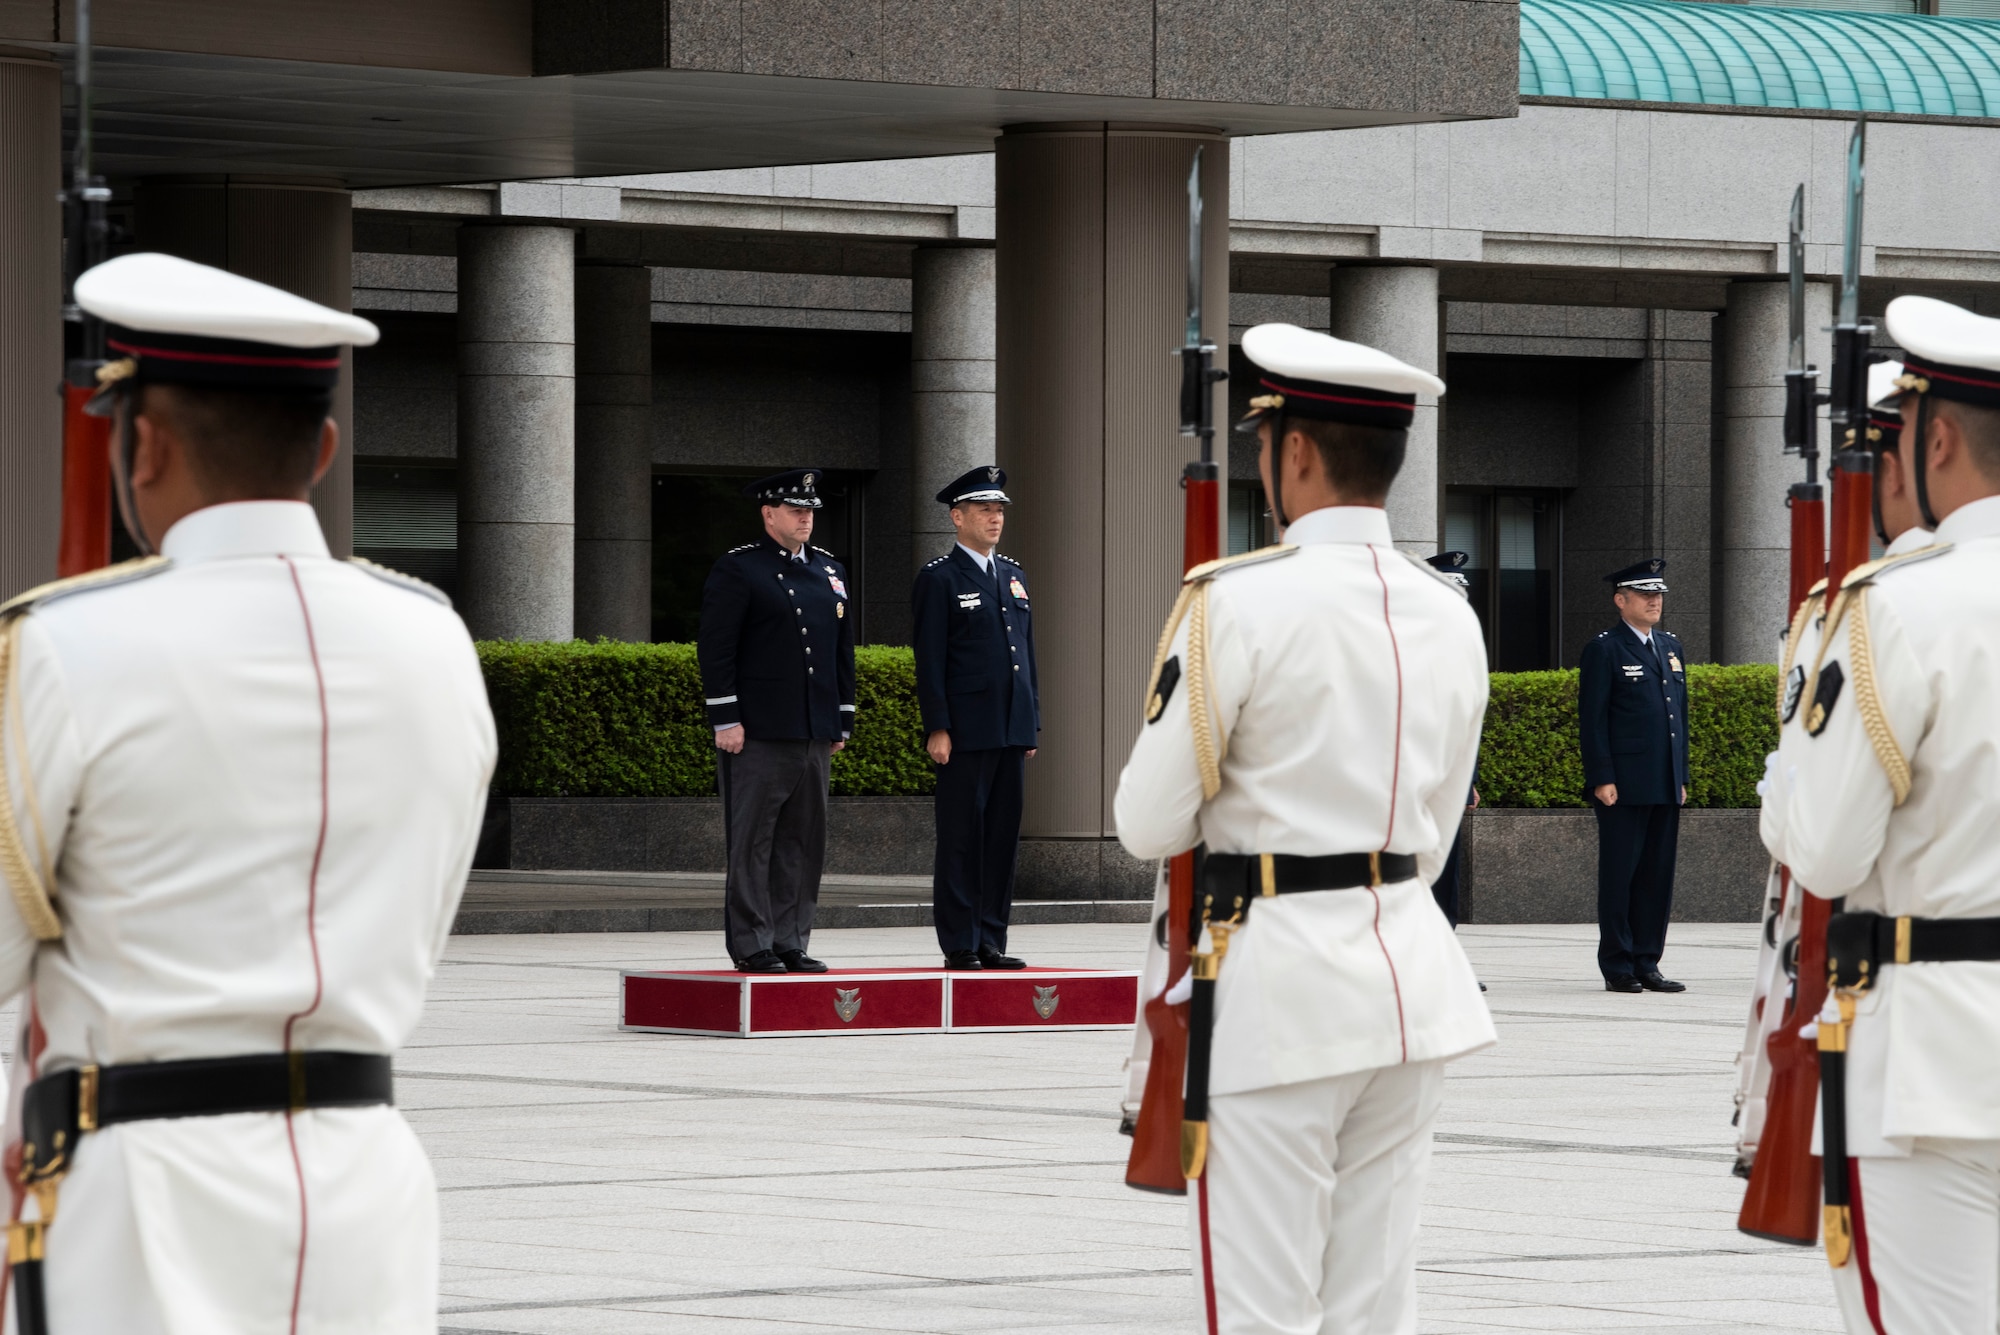 People standing in formation during a ceremony.